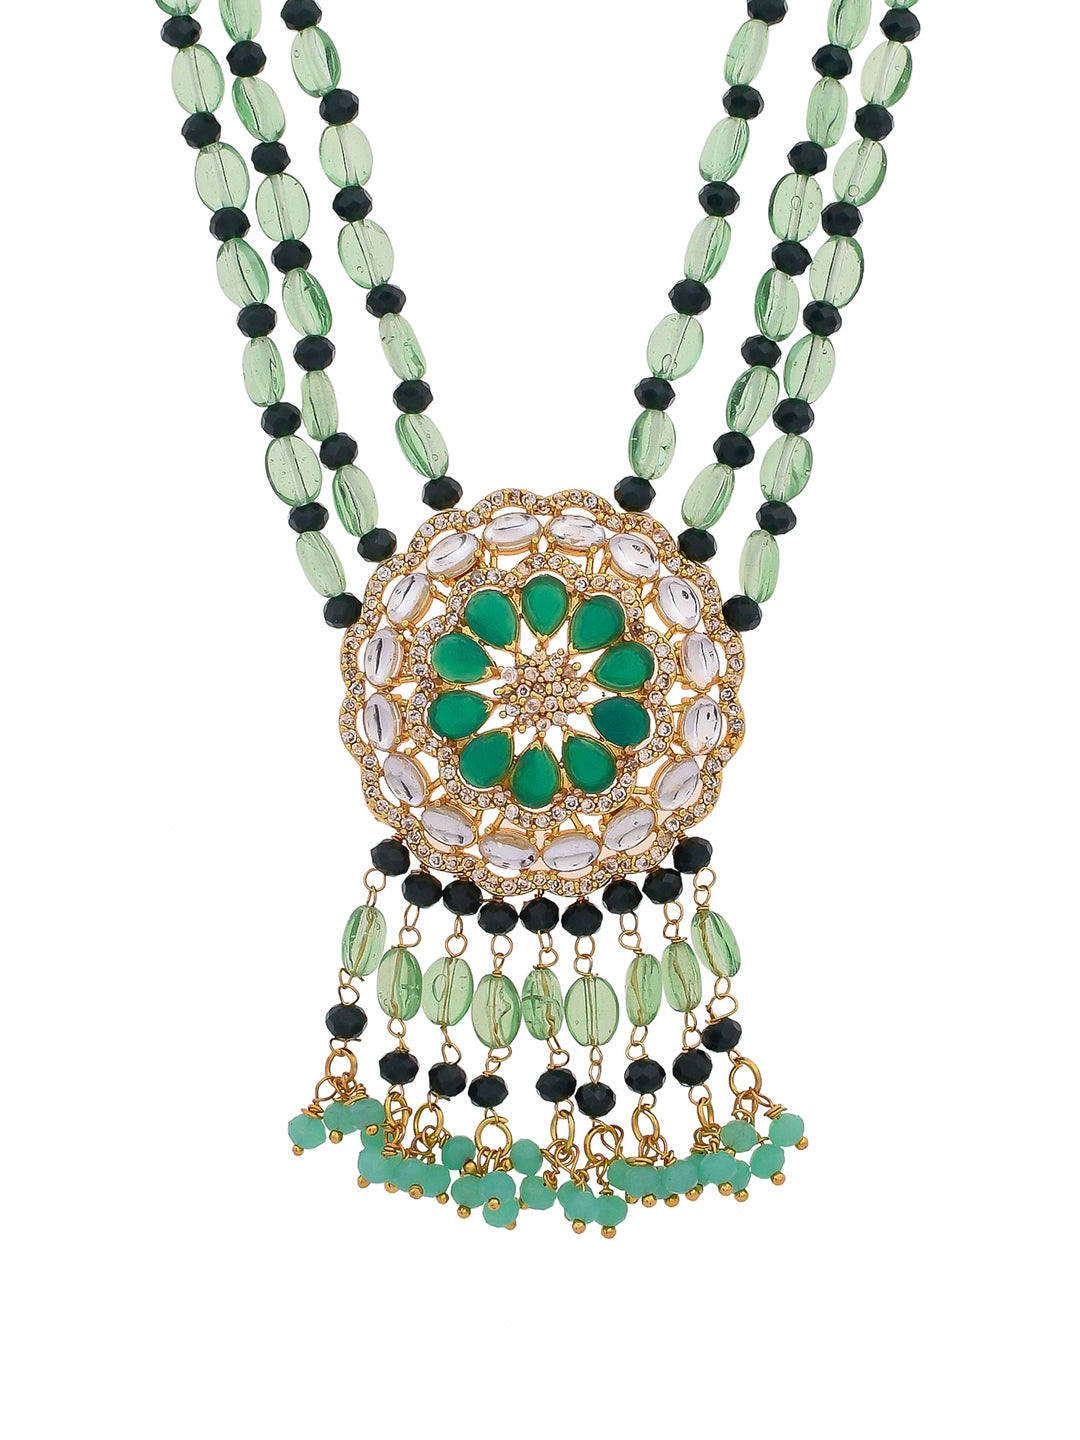 Experience traditional elegance and sophistication with our Handcrafted Green Beaded Long Layered Kundan with pearl for women/girls. Each piece is expertly crafted by hand, showcasing intricate beading and stunning pearl accents. Elevate any outfit and stand out with this timeless and unique accessory.